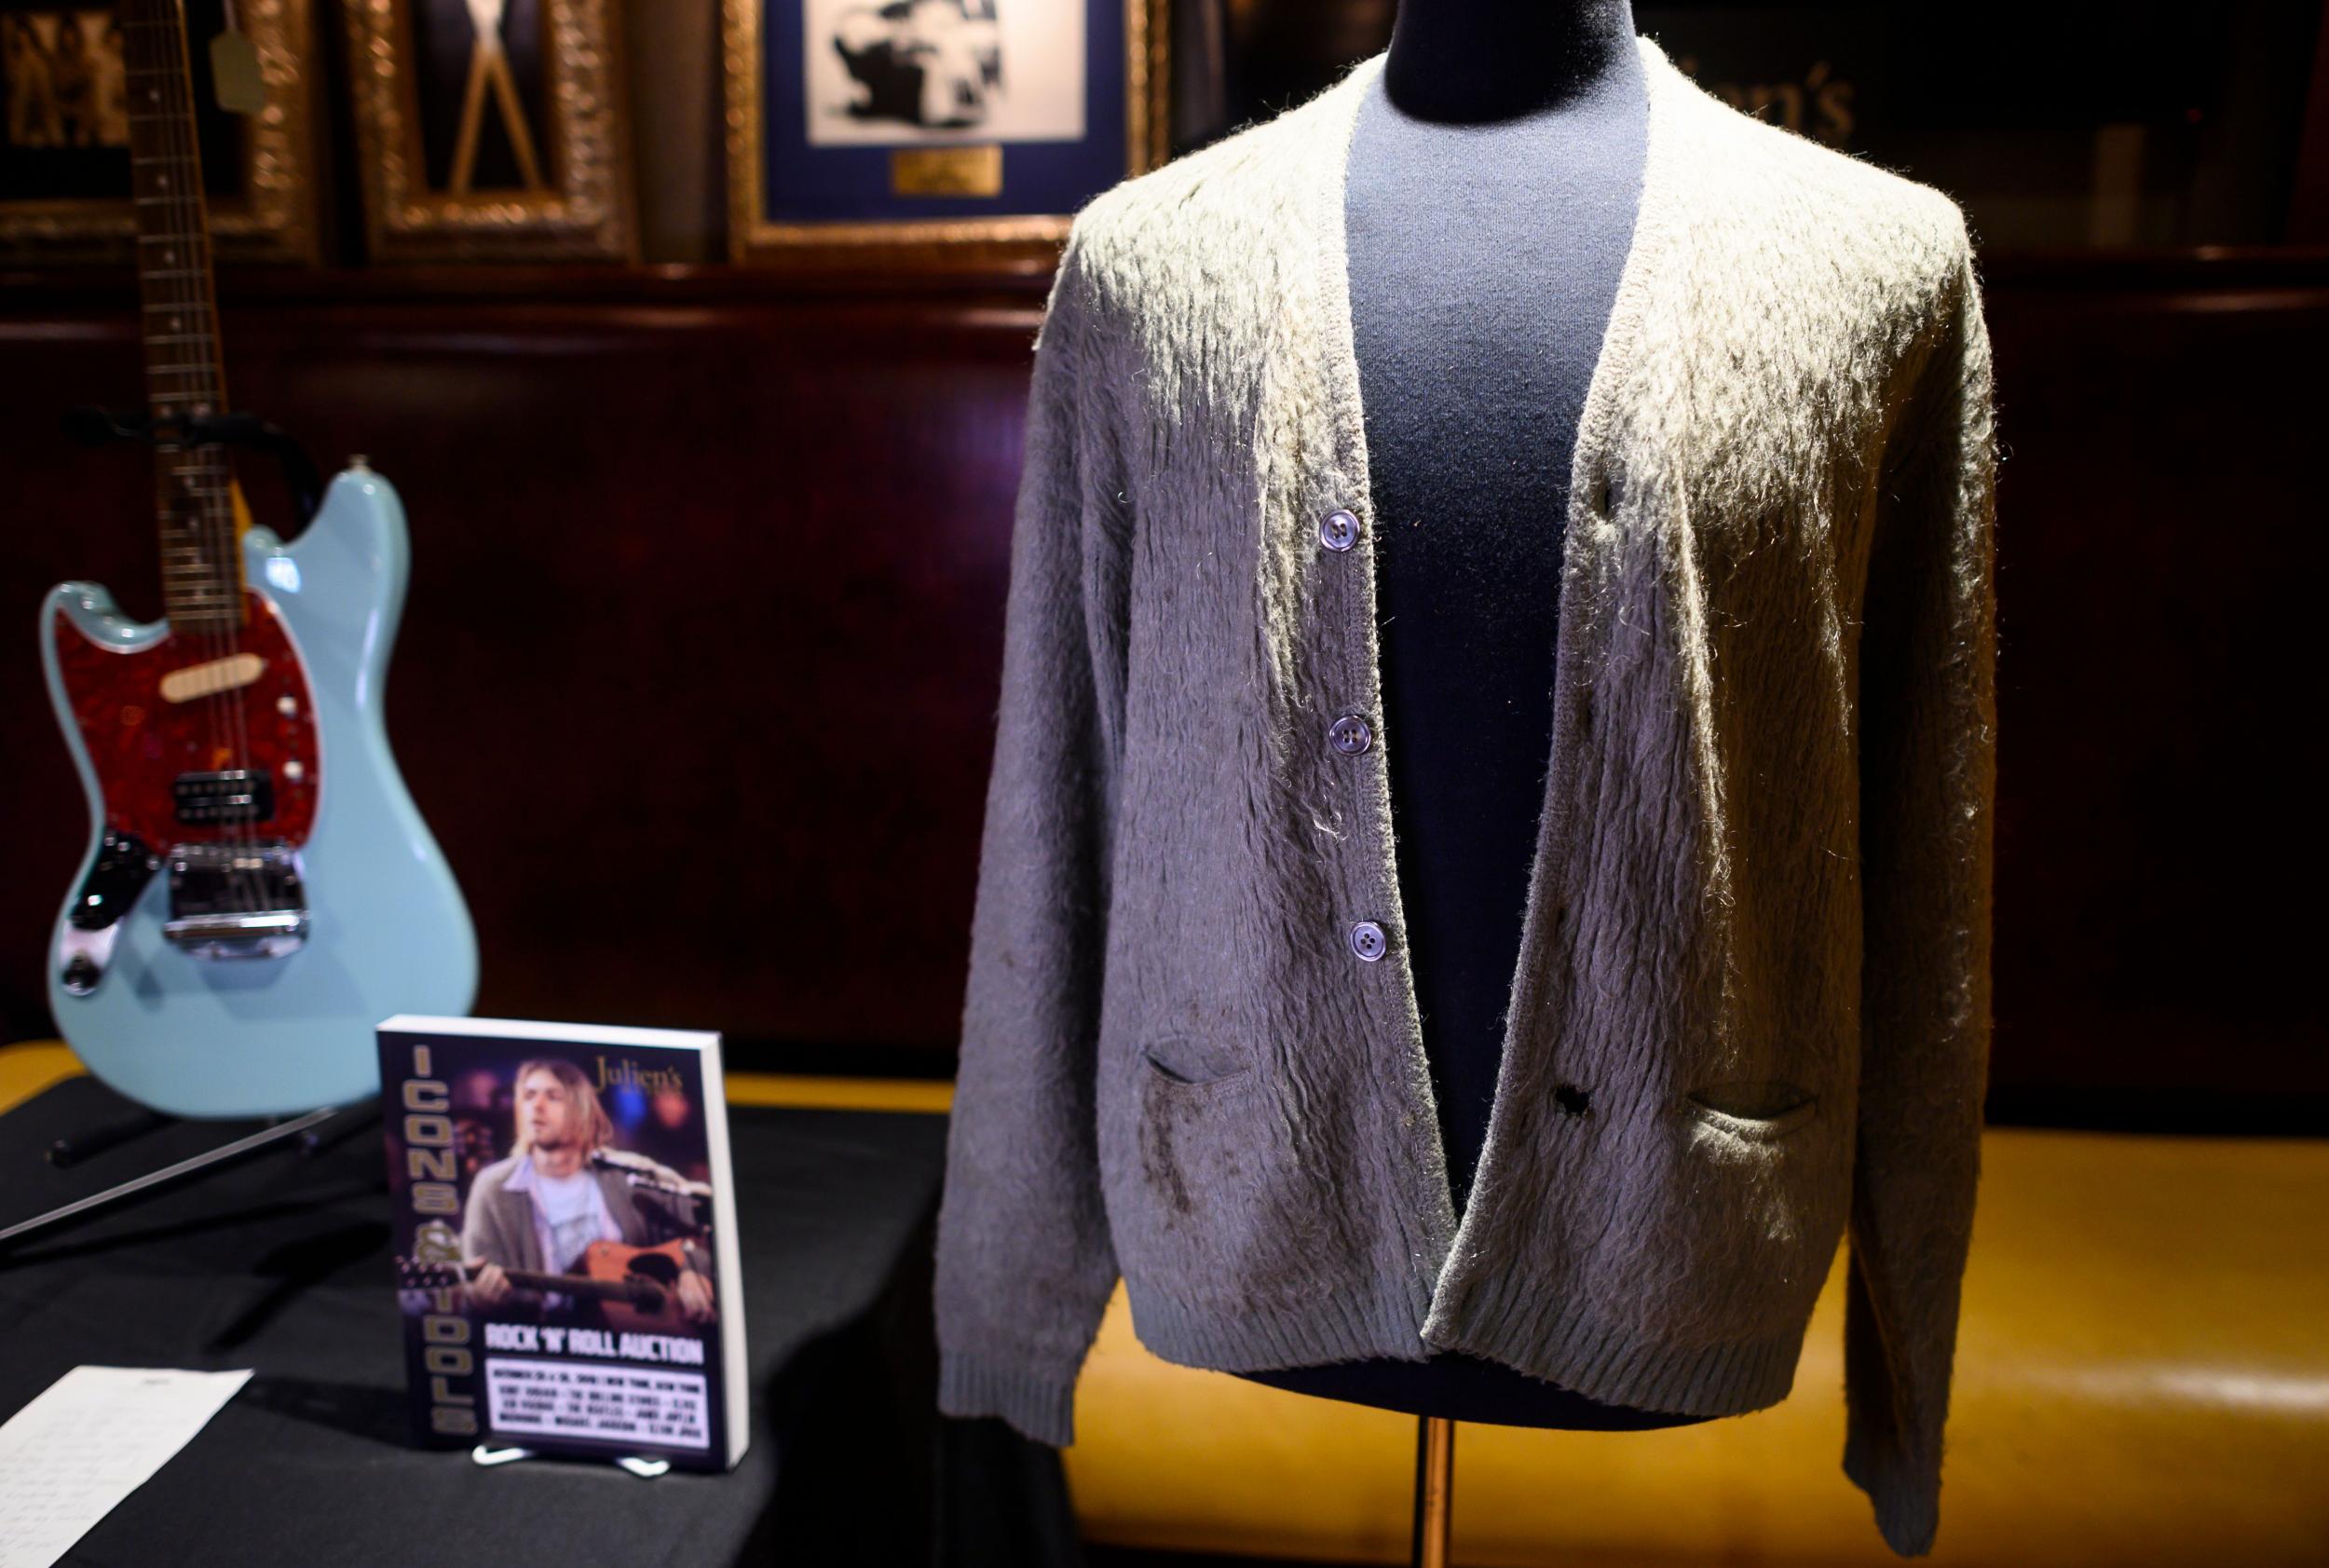 Kurt Cobain’s cardigan from Nirvana’s 1993 MTV Unplugged performance on display at the Hard Rock Cafe in New York City (Getty Images)